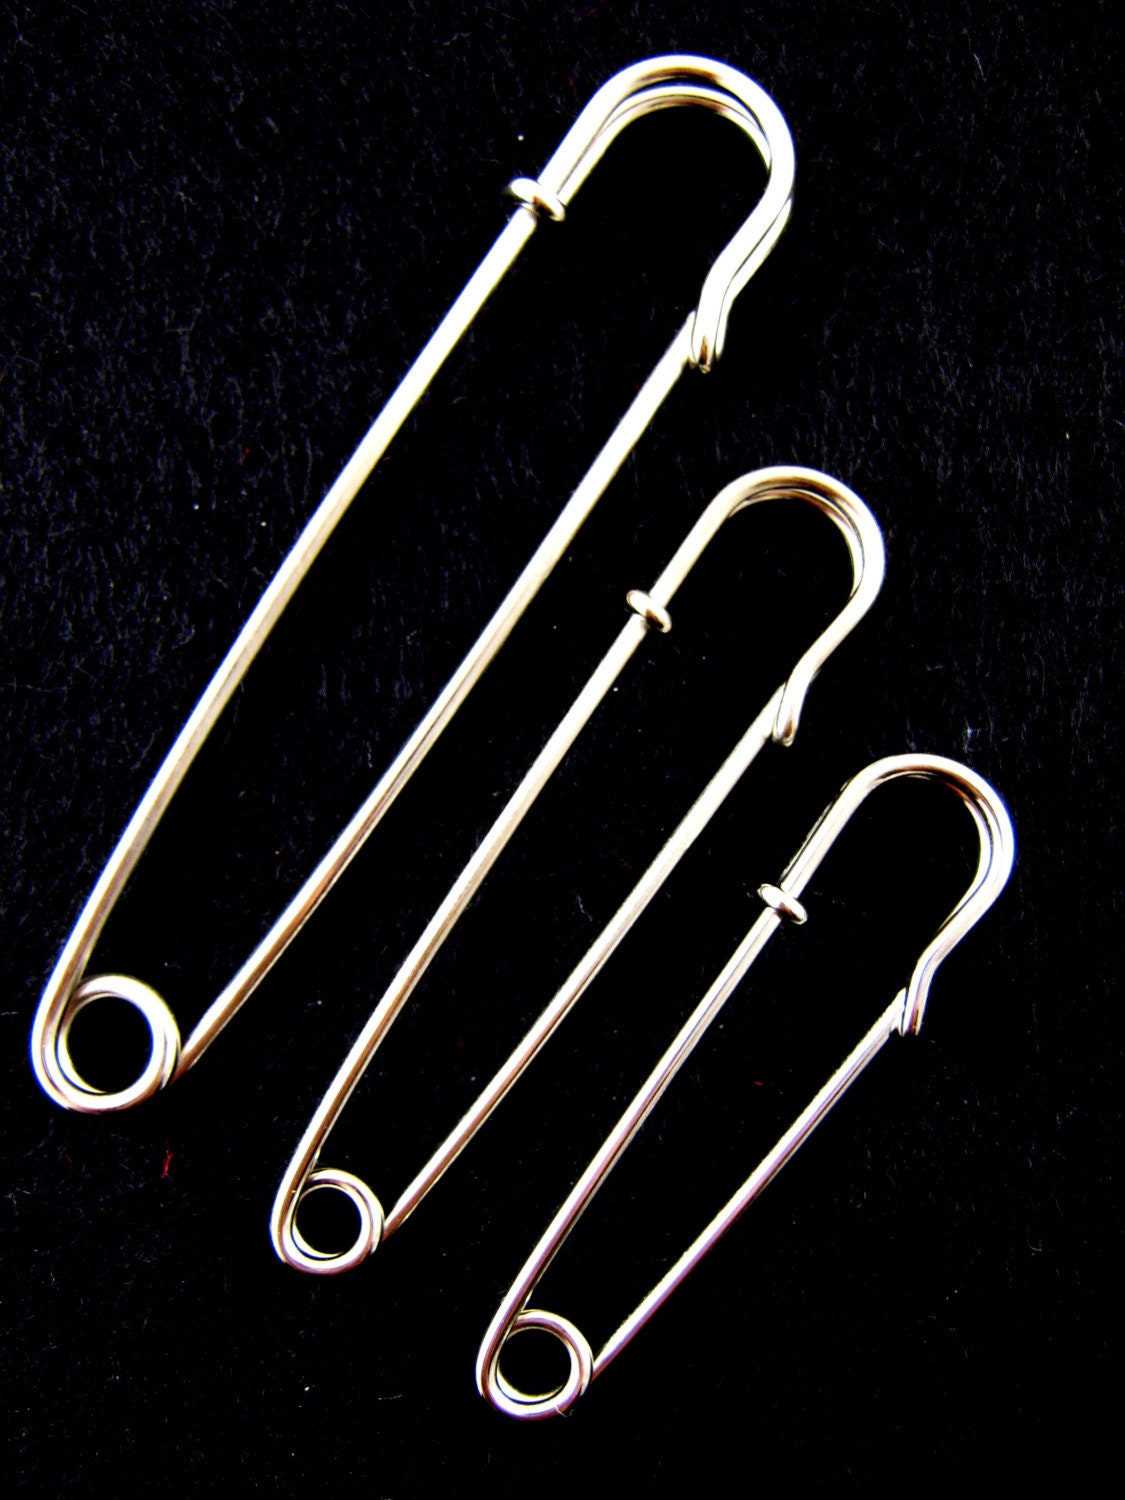 20 Pcs Small Medium Large Heavy Duty Safety Pins Clothing Clothes Cards  Wedding Brooches Steel Nappy Kilt Pins 